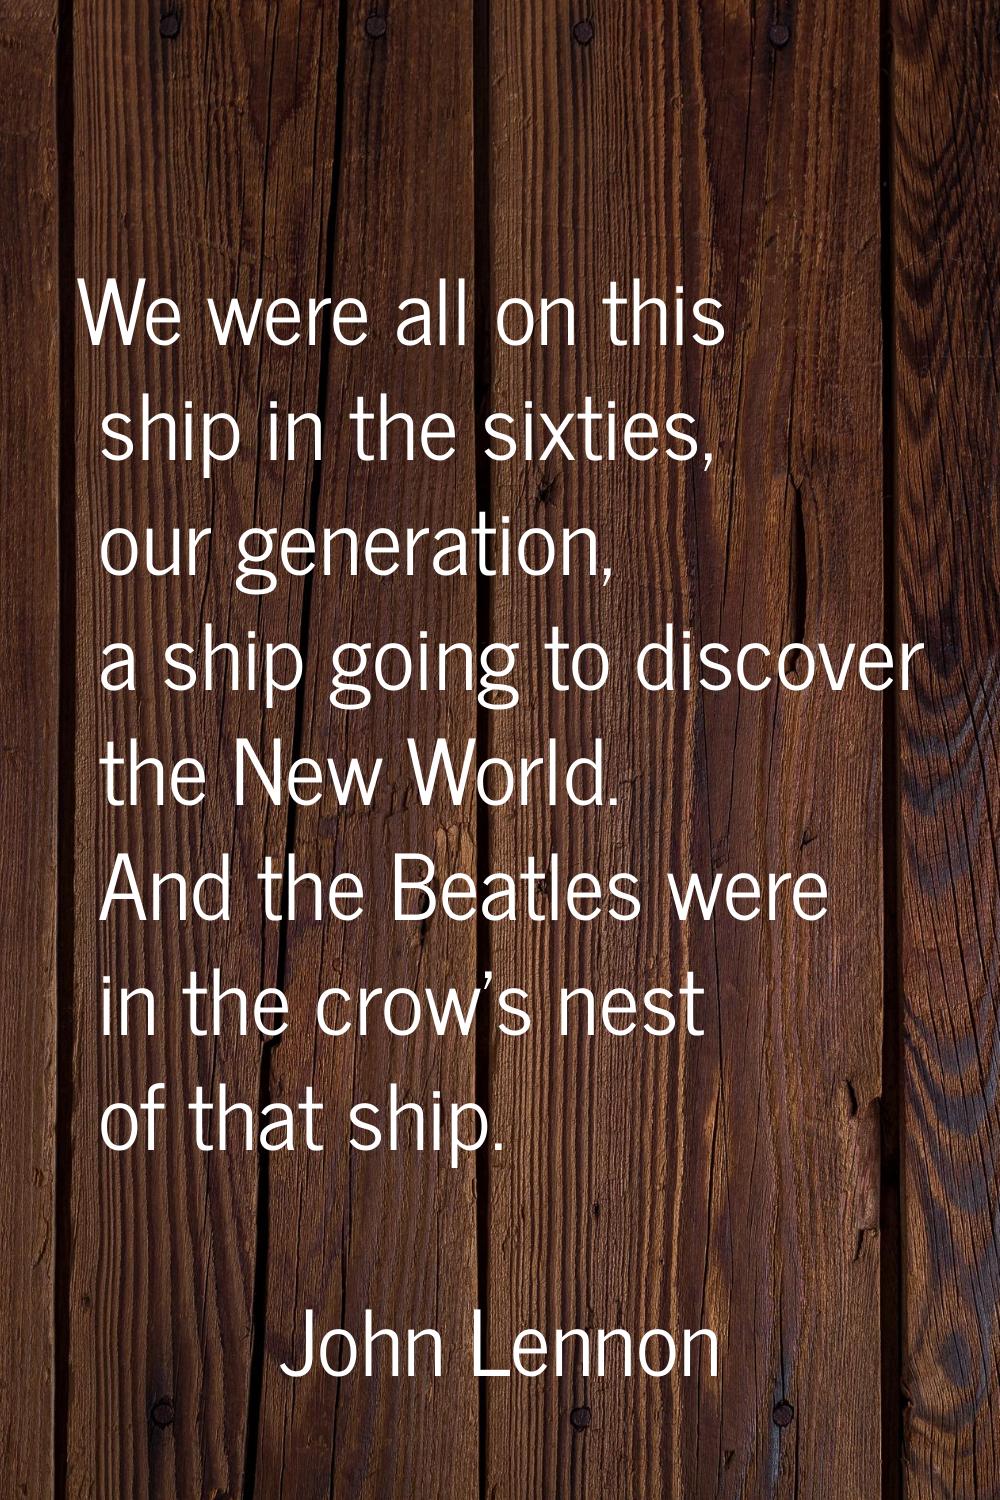 We were all on this ship in the sixties, our generation, a ship going to discover the New World. An